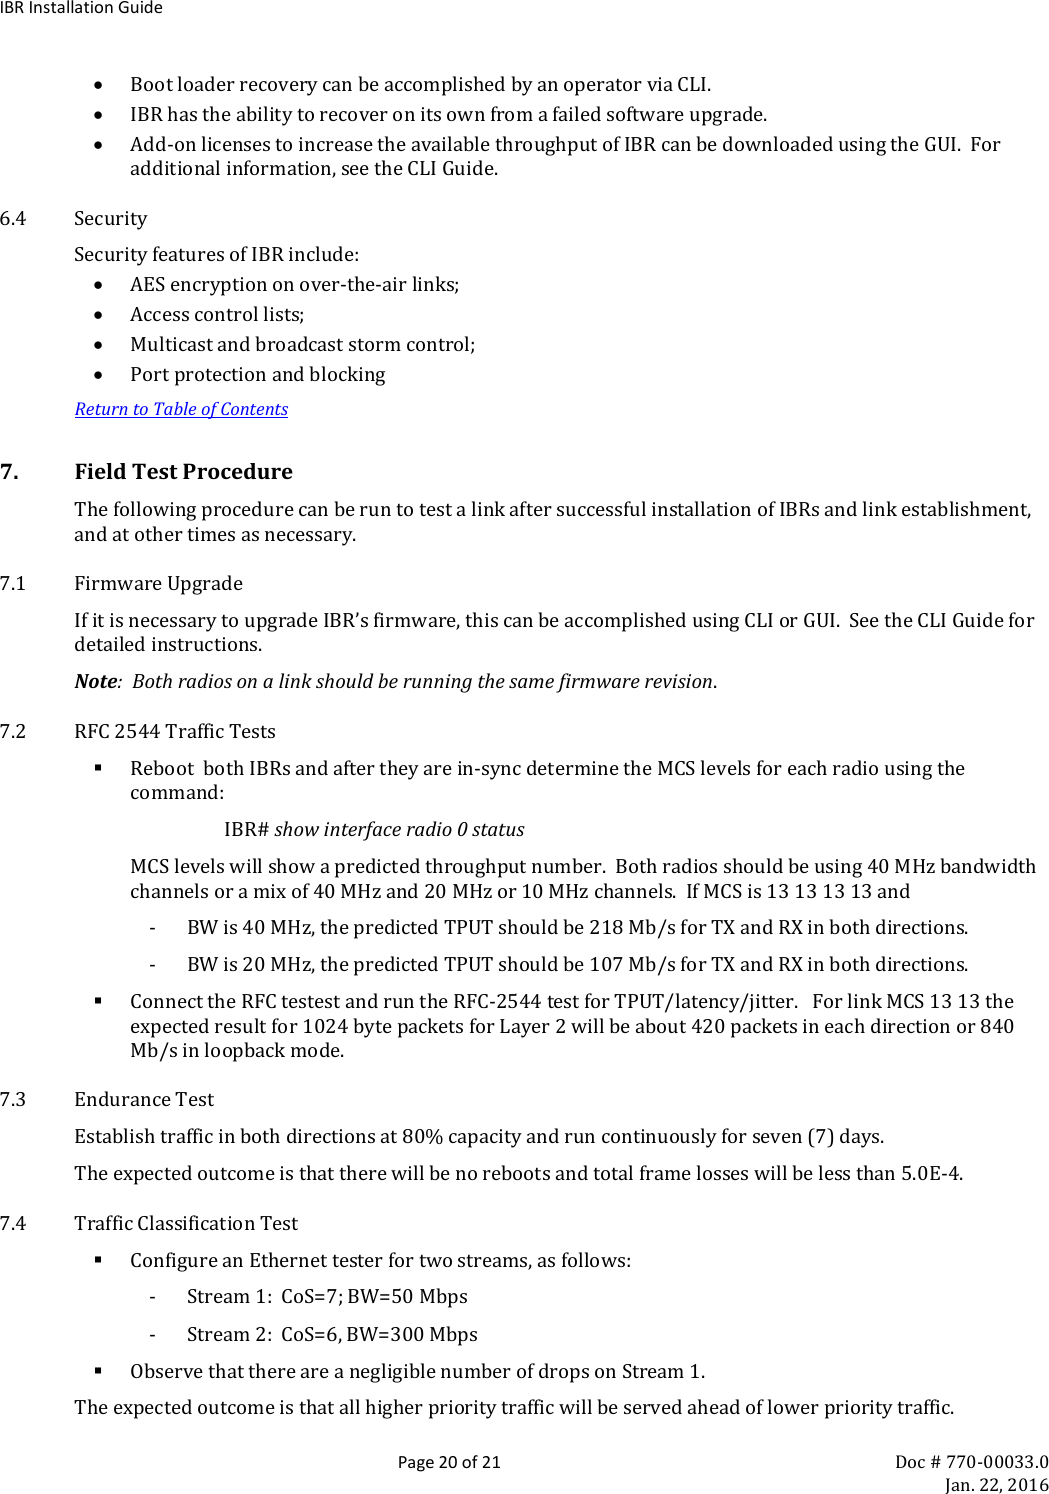 IBR Installation Guide  Page 20 of 21 Doc # 770-00033.0     Jan. 22, 2016 • Boot loader recovery can be accomplished by an operator via CLI. • IBR has the ability to recover on its own from a failed software upgrade. • Add-on licenses to increase the available throughput of IBR can be downloaded using the GUI.  For additional information, see the CLI Guide. 6.4 Security Security features of IBR include: • AES encryption on over-the-air links;  • Access control lists; • Multicast and broadcast storm control; • Port protection and blocking Return to Table of Contents 7. Field Test Procedure The following procedure can be run to test a link after successful installation of IBRs and link establishment, and at other times as necessary. 7.1 Firmware Upgrade If it is necessary to upgrade IBR’s firmware, this can be accomplished using CLI or GUI.  See the CLI Guide for detailed instructions. Note:  Both radios on a link should be running the same firmware revision. 7.2 RFC 2544 Traffic Tests  Reboot  both IBRs and after they are in-sync determine the MCS levels for each radio using the command: IBR# show interface radio 0 status MCS levels will show a predicted throughput number.  Both radios should be using 40 MHz bandwidth channels or a mix of 40 MHz and 20 MHz or 10 MHz channels.  If MCS is 13 13 13 13 and - BW is 40 MHz, the predicted TPUT should be 218 Mb/s for TX and RX in both directions.  - BW is 20 MHz, the predicted TPUT should be 107 Mb/s for TX and RX in both directions.    Connect the RFC testest and run the RFC-2544 test for TPUT/latency/jitter.   For link MCS 13 13 the expected result for 1024 byte packets for Layer 2 will be about 420 packets in each direction or 840 Mb/s in loopback mode.   7.3 Endurance Test Establish traffic in both directions at 80% capacity and run continuously for seven (7) days. The expected outcome is that there will be no reboots and total frame losses will be less than 5.0E-4. 7.4 Traffic Classification Test  Configure an Ethernet tester for two streams, as follows: - Stream 1:  CoS=7; BW=50 Mbps - Stream 2:  CoS=6, BW=300 Mbps  Observe that there are a negligible number of drops on Stream 1. The expected outcome is that all higher priority traffic will be served ahead of lower priority traffic.